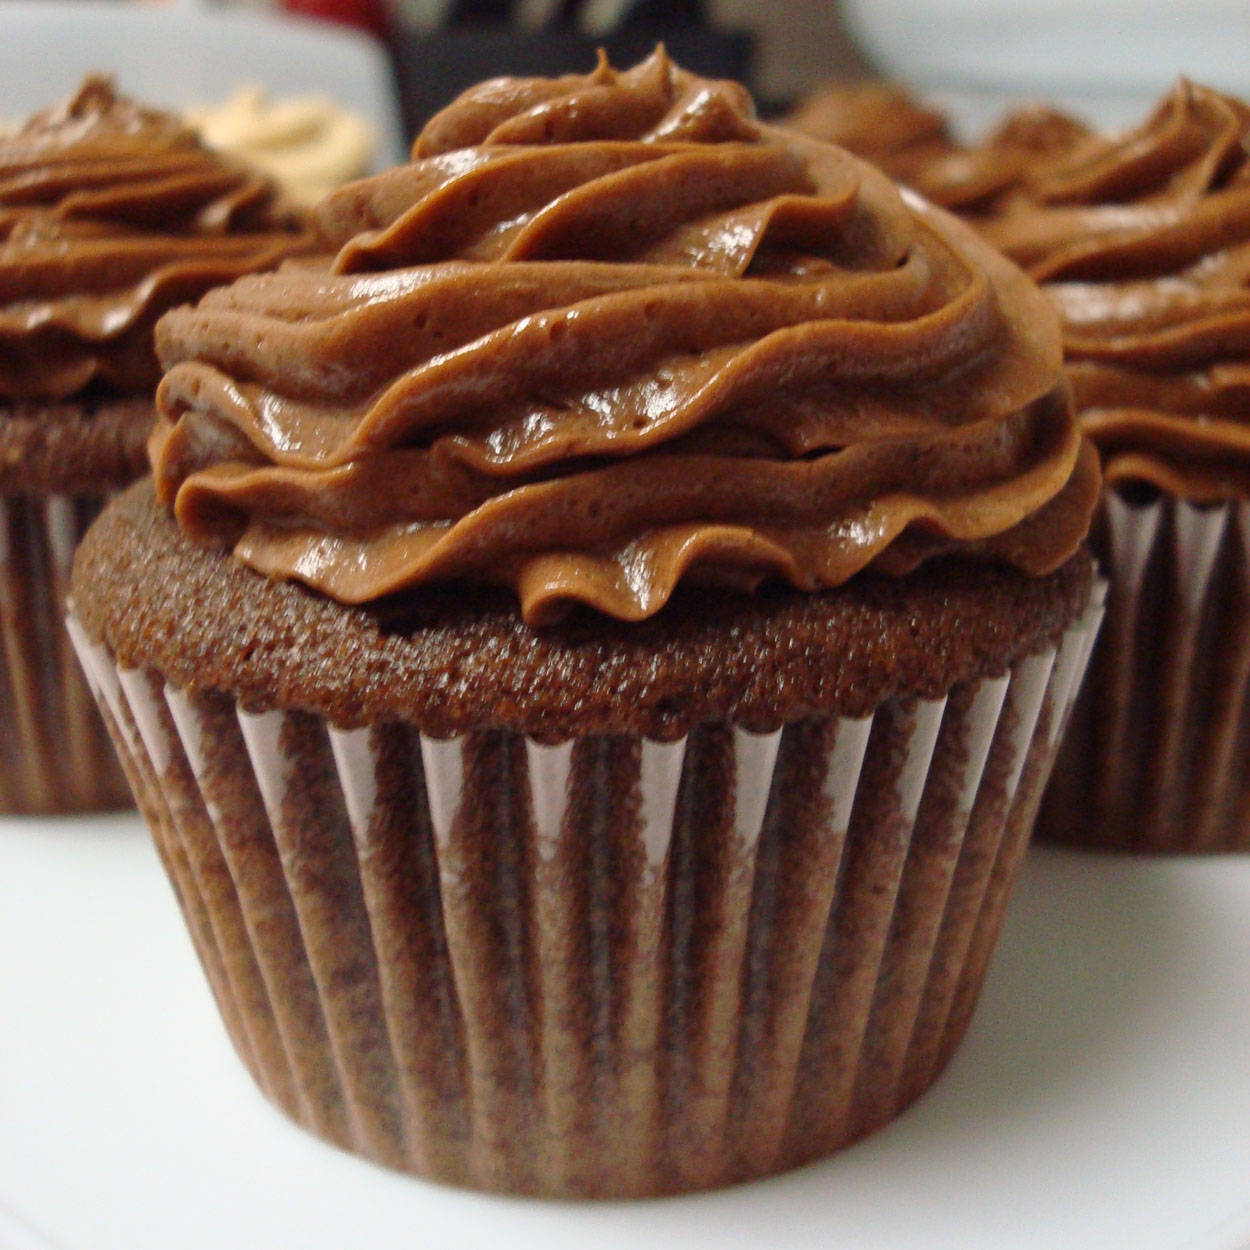 & cheese peanut buttercream how butter frosting buttercream Peanut butter to cream make  frosting Chocolate Kitchen: